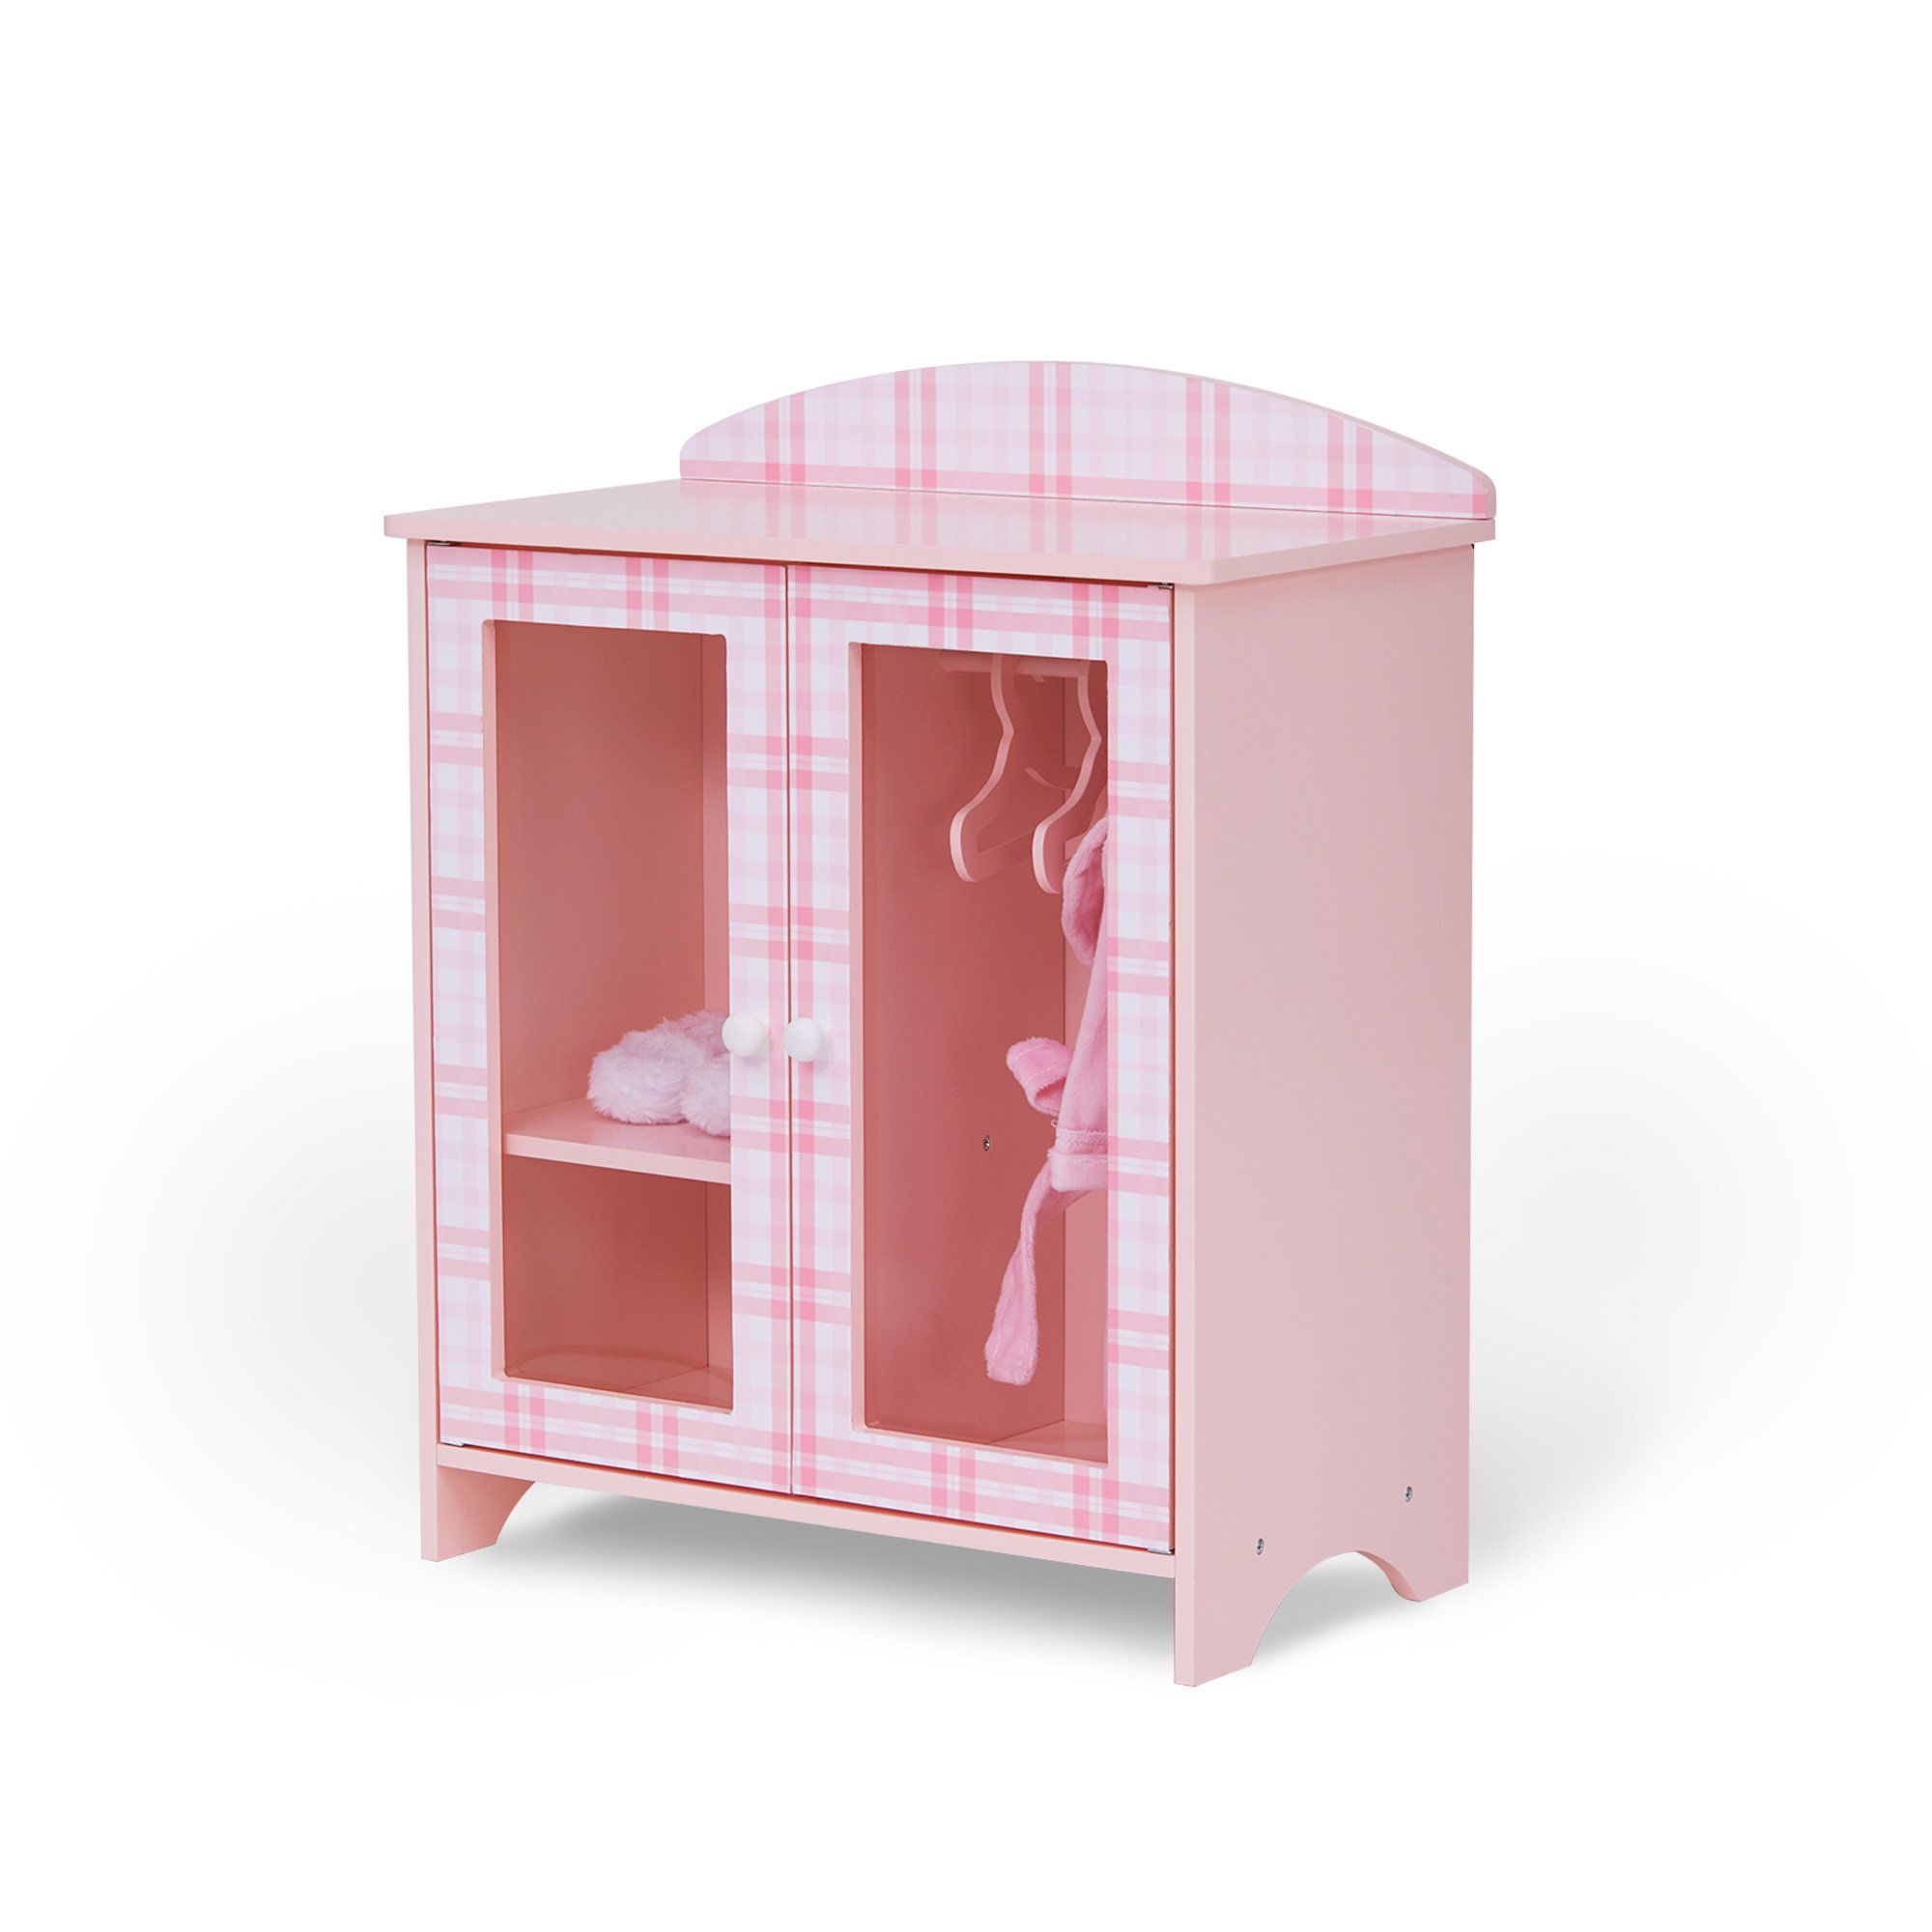 Sophia's Princess Closet Dollhouse Furniture And Accessories | Wayfair Intended For The Princess Wardrobes (View 9 of 15)